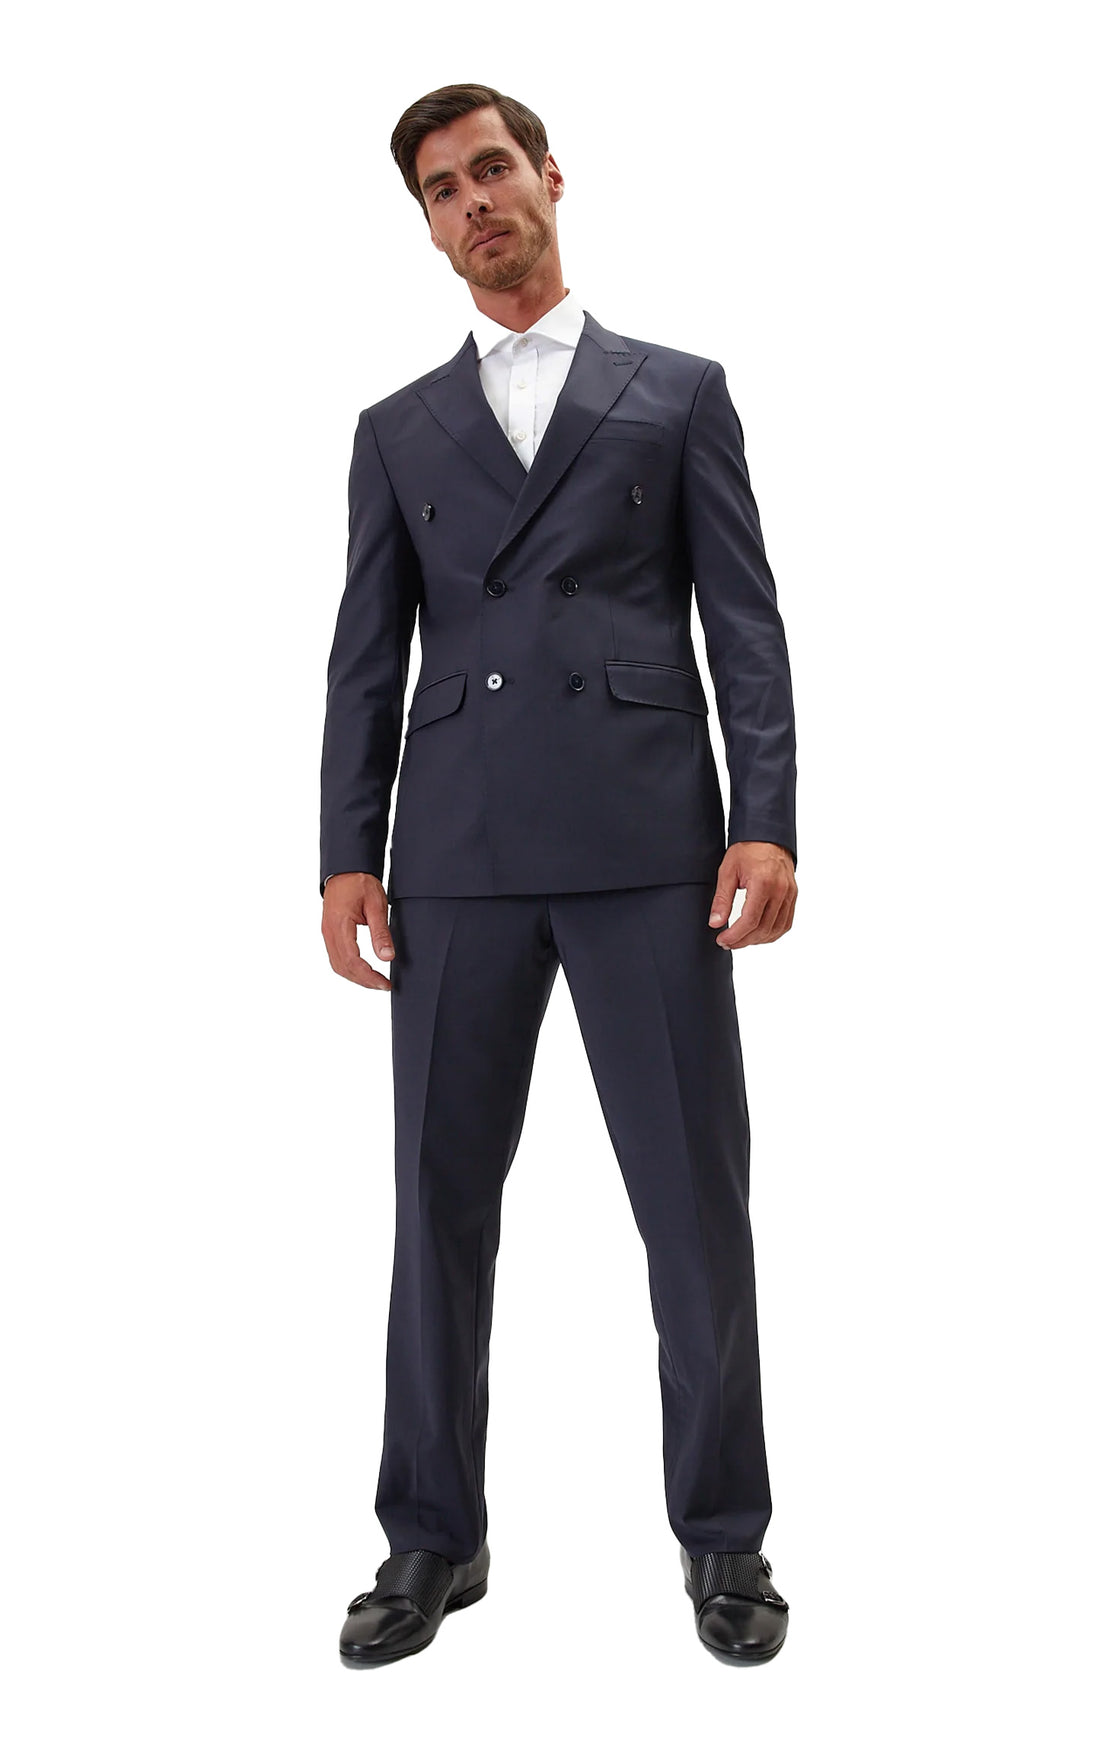 N° R206 SUPER 120S MERINO WOOL DOUBLE BREASTED SUIT - MIDNIGHT BLUE